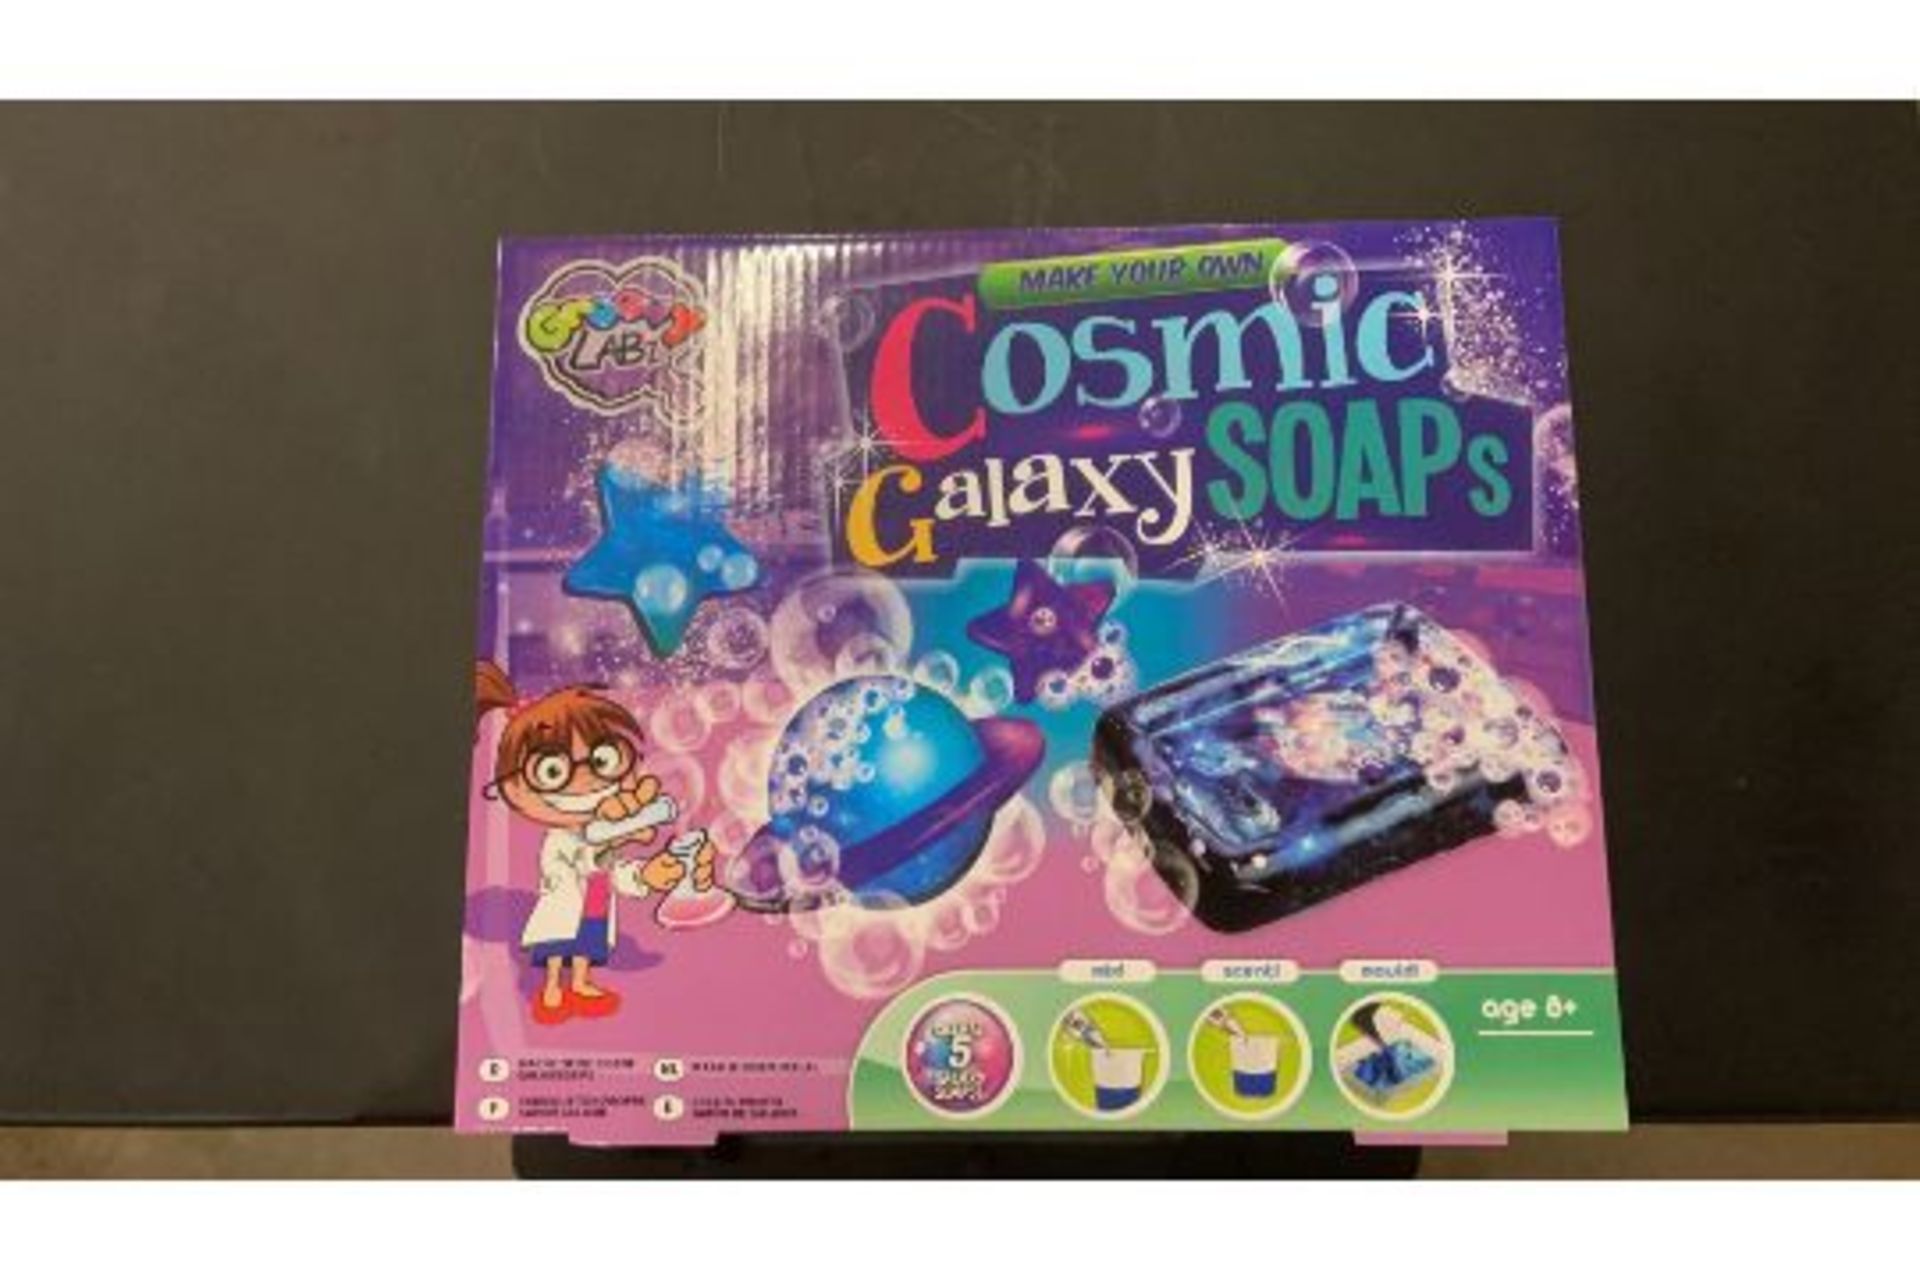 NEW GROOVY LABZ MAKE YOUR OWN COSMIC GALAXY SOAP